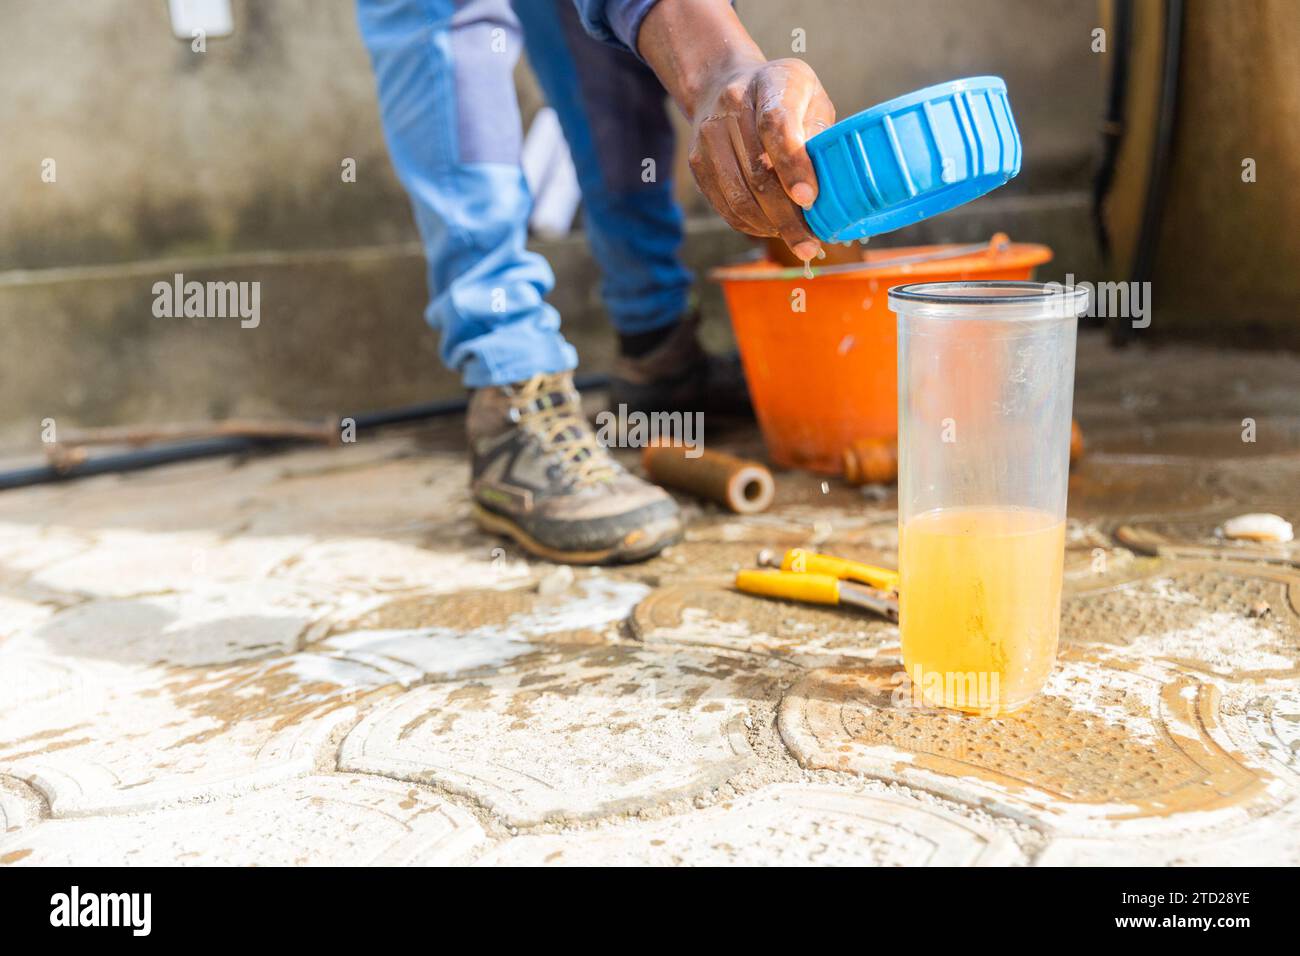 African plumber and a glass of rusty dirty water from a used water filtration cartridge. Stock Photo